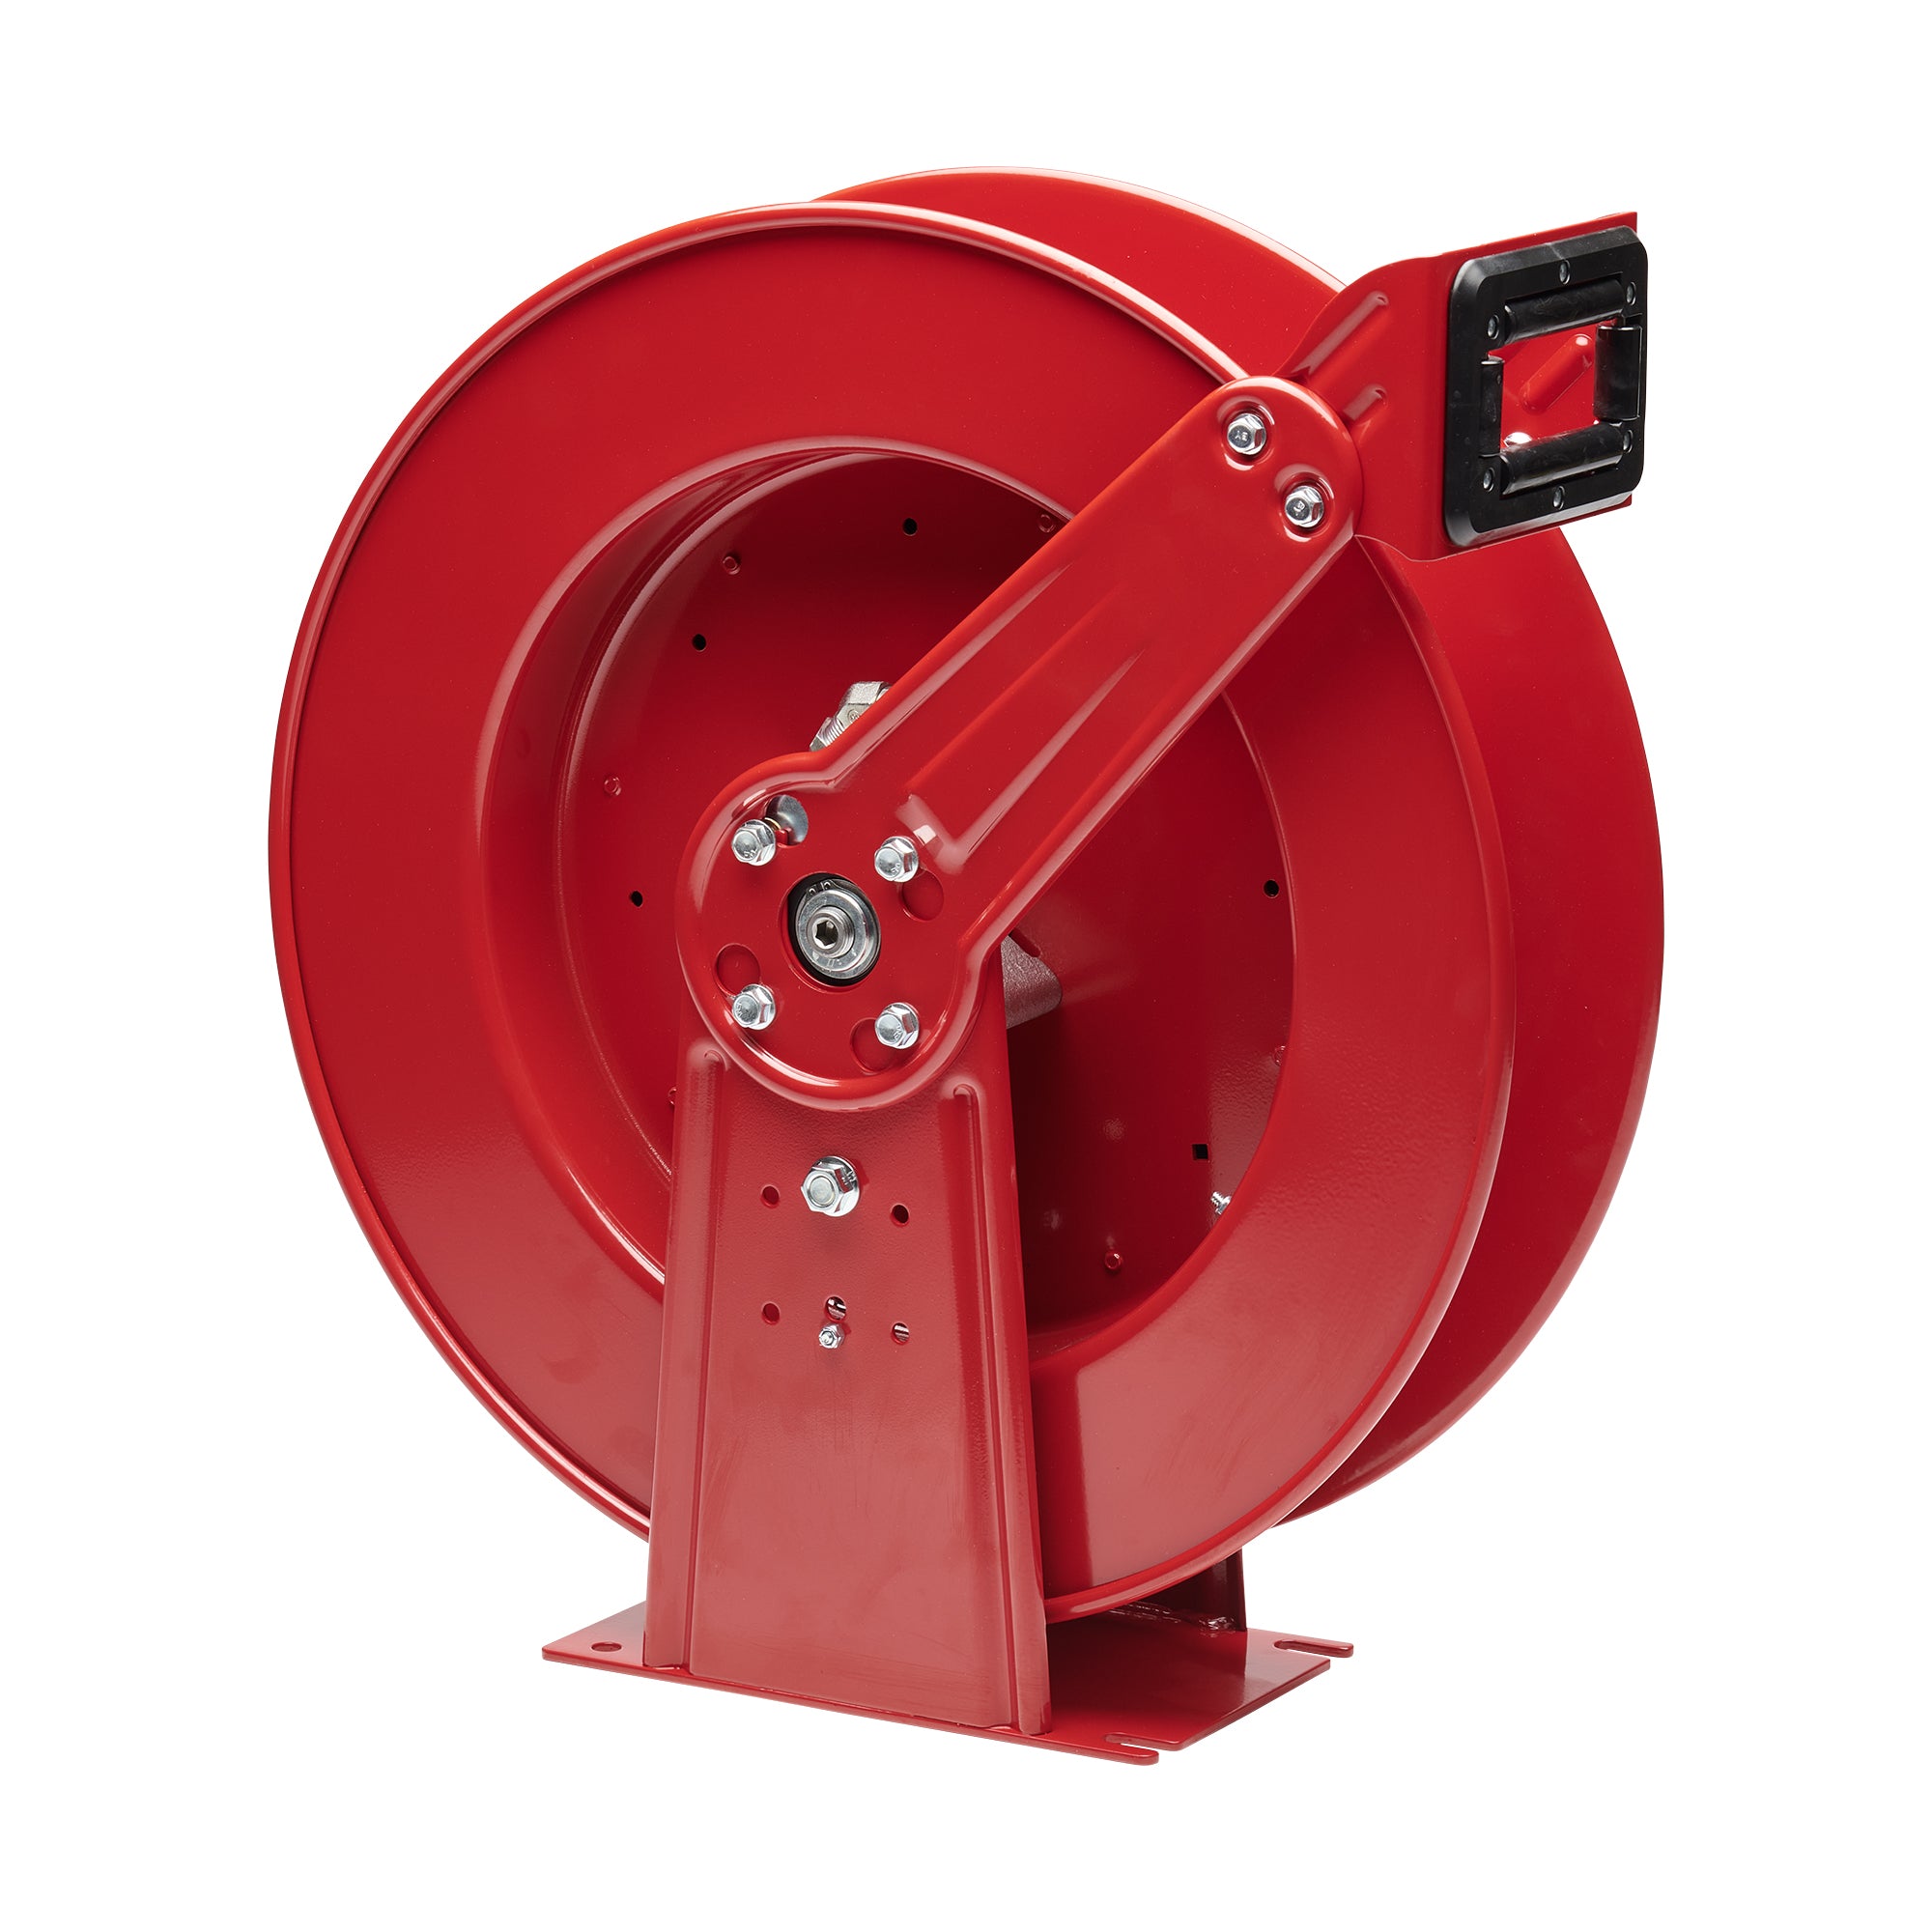 Reelcraft PW81000 OHP 3/8 in x 100 ft Premium Duty Pressure Wash Hose Reel - MPR Tools & Equipment